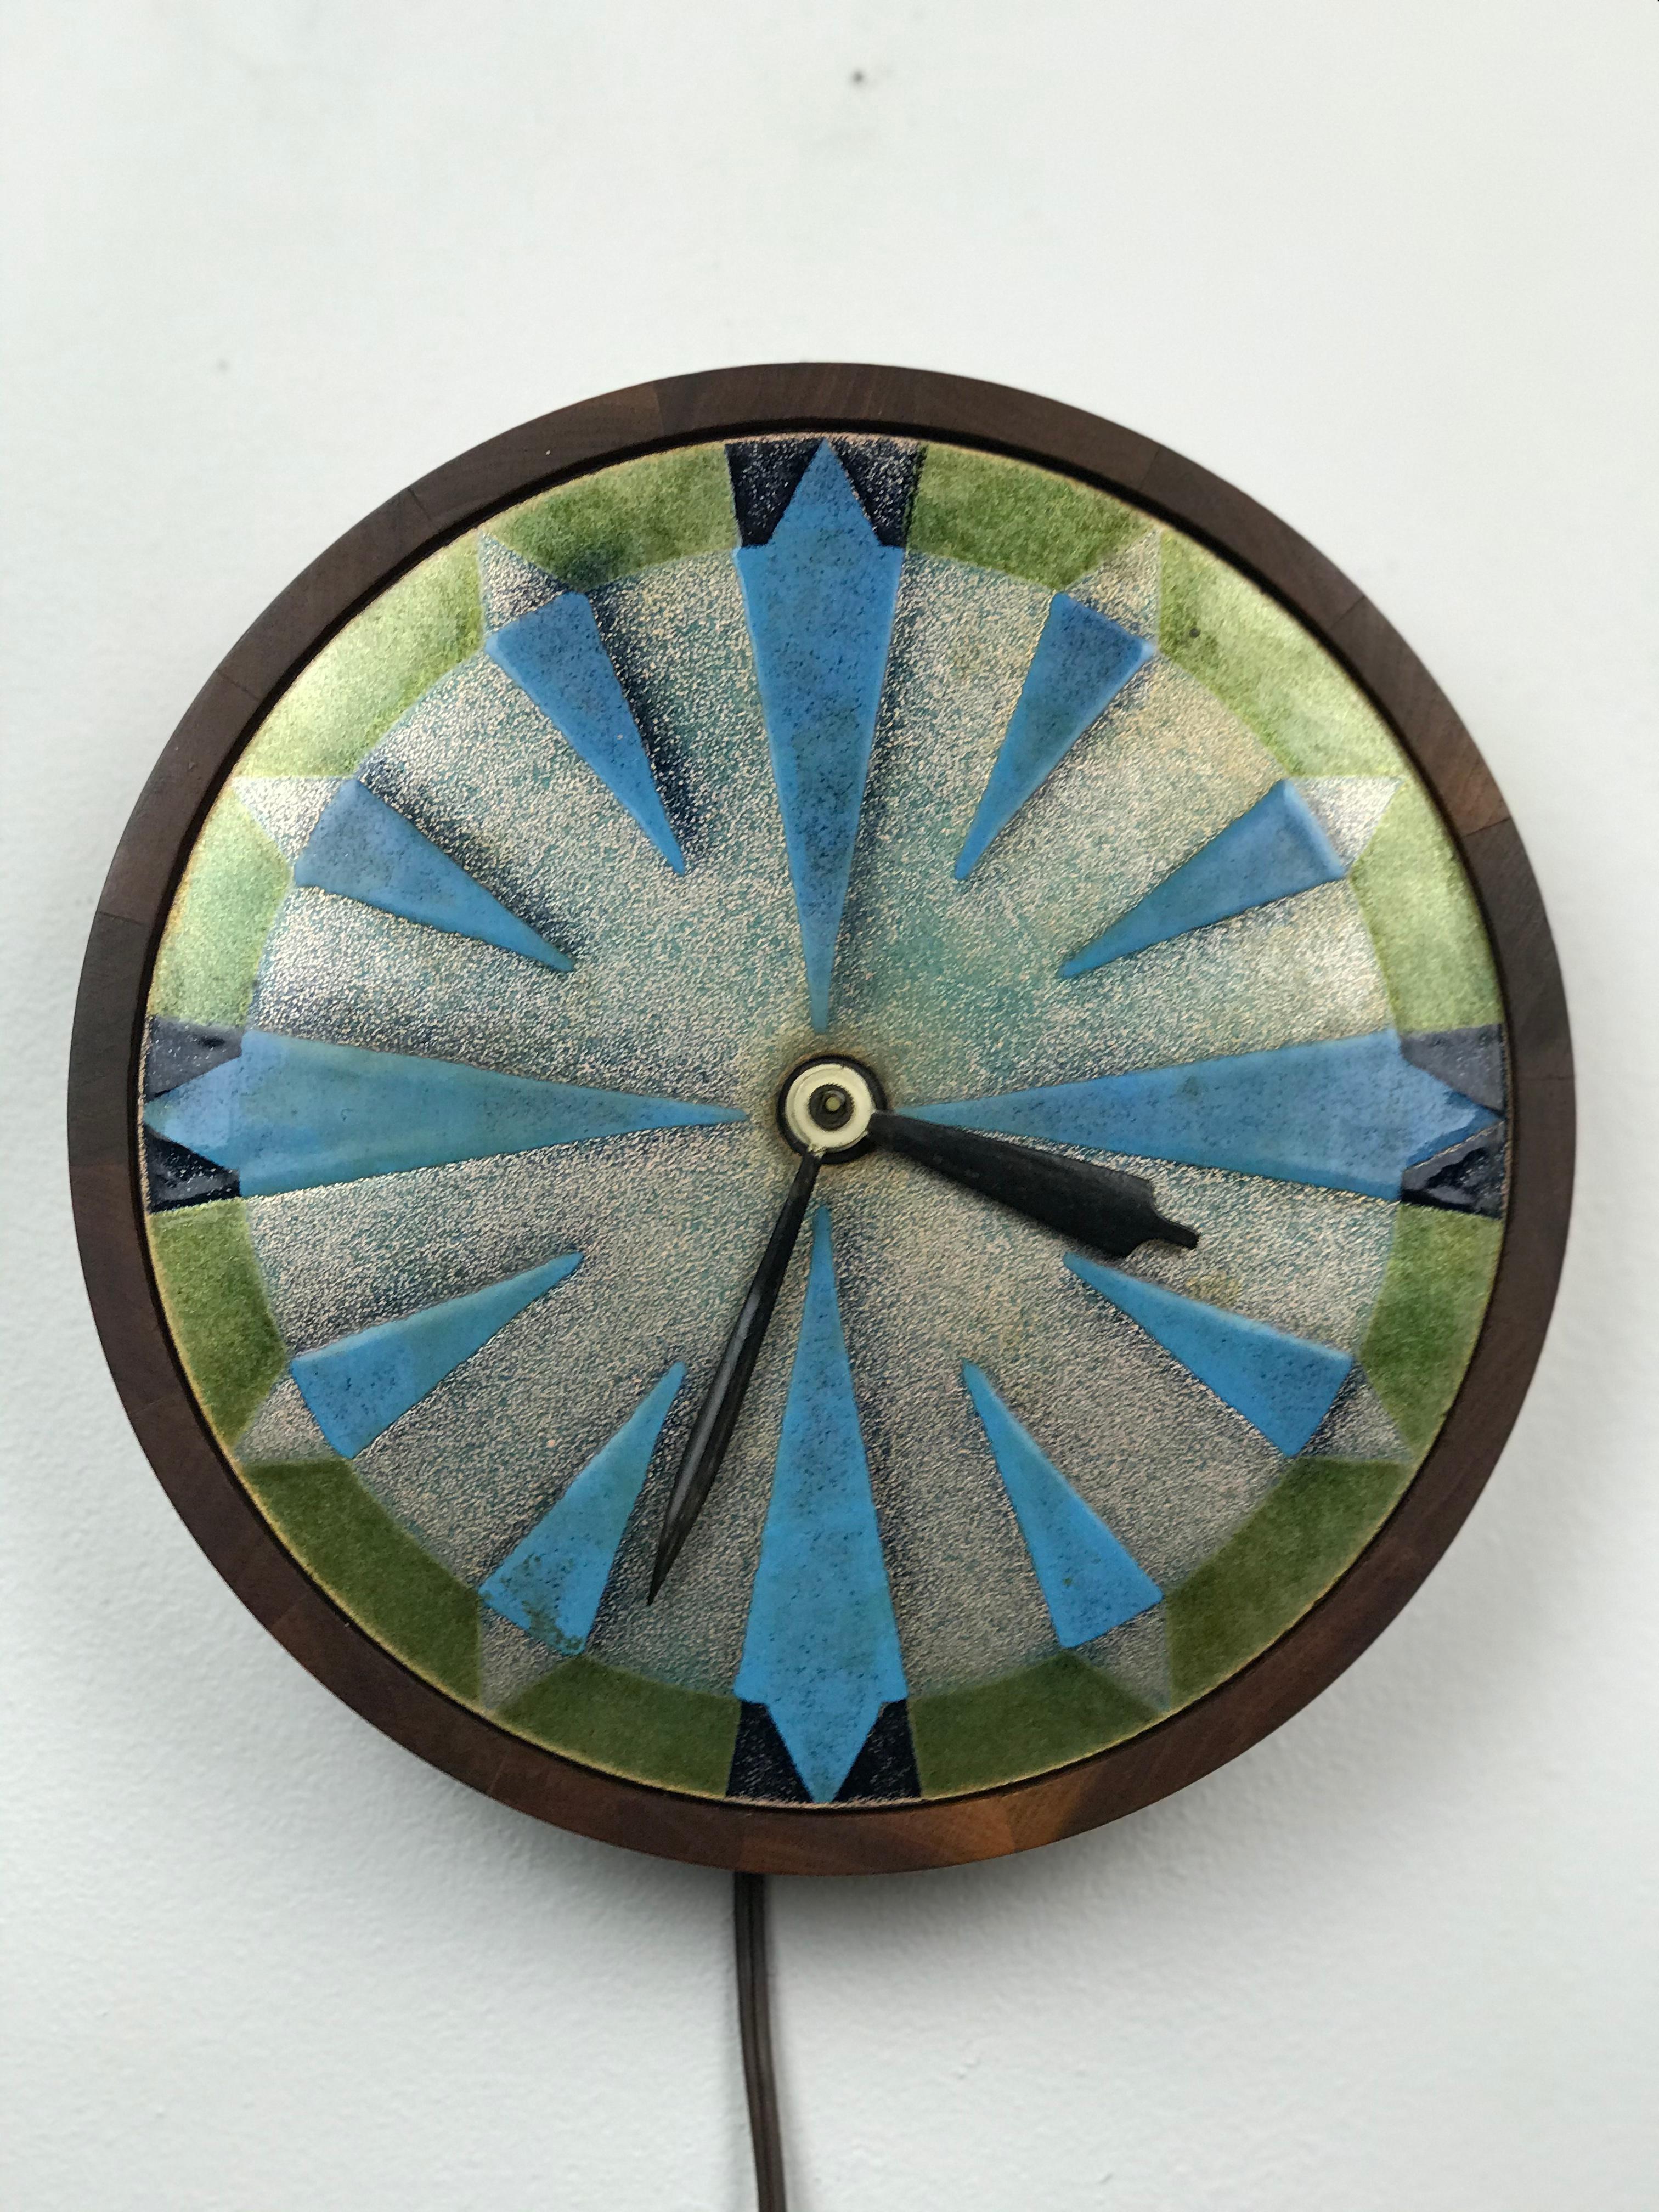 Scarce midcentury wall clock in painted enamel on copper with a thick walnut case by Judith Daner, 1960s. The clock works nicely and keeps accurate time. Changing to a battery mechanism can be done quickly if you prefer. Nice silver/green/blue hues.